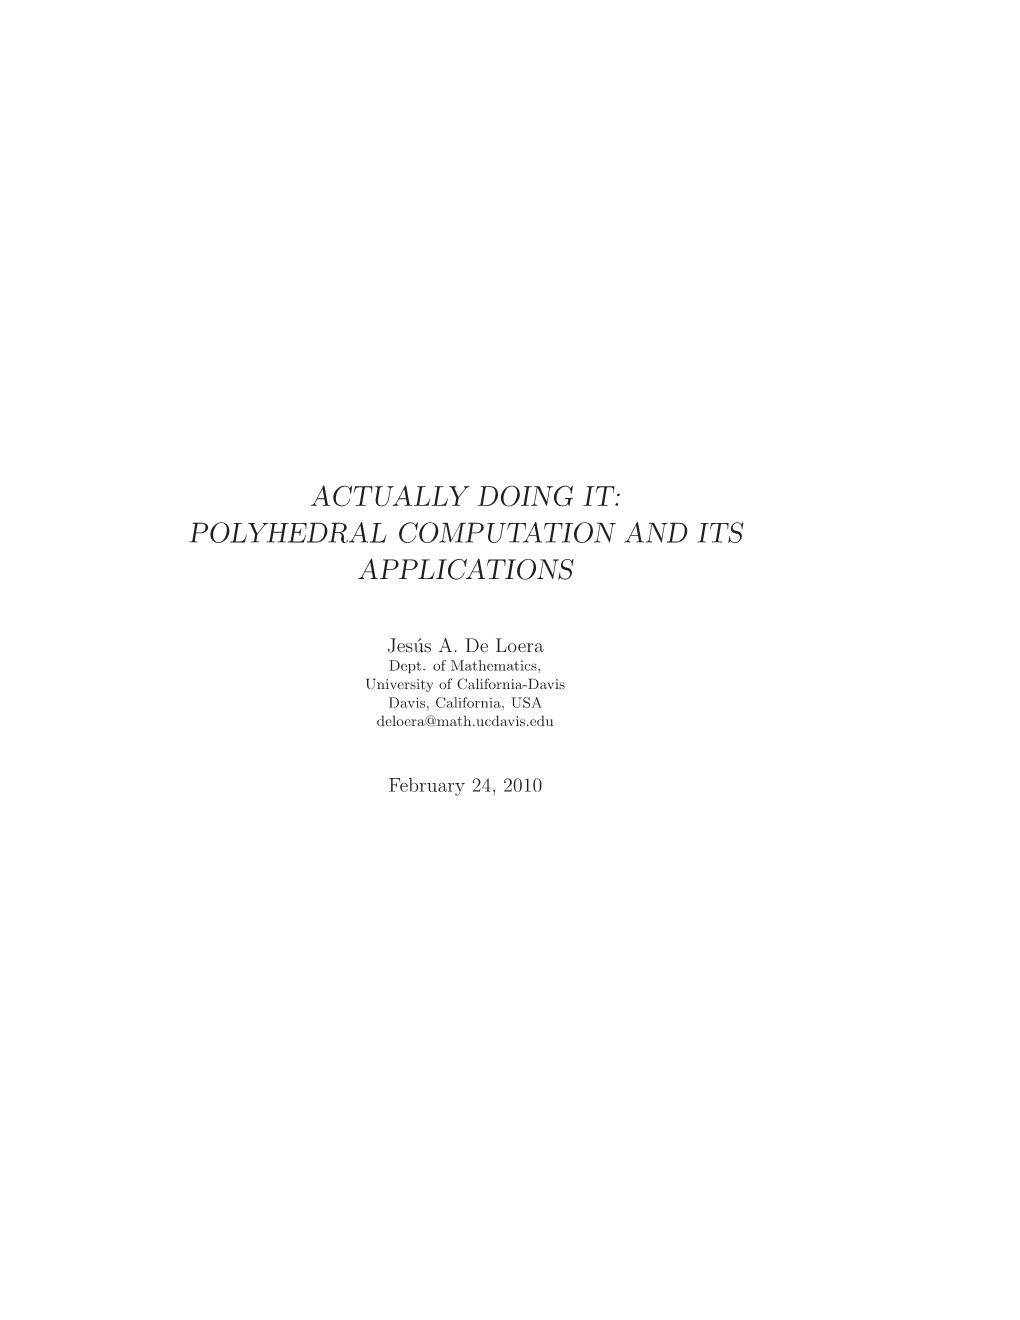 Actually Doing It: Polyhedral Computation and Its Applications